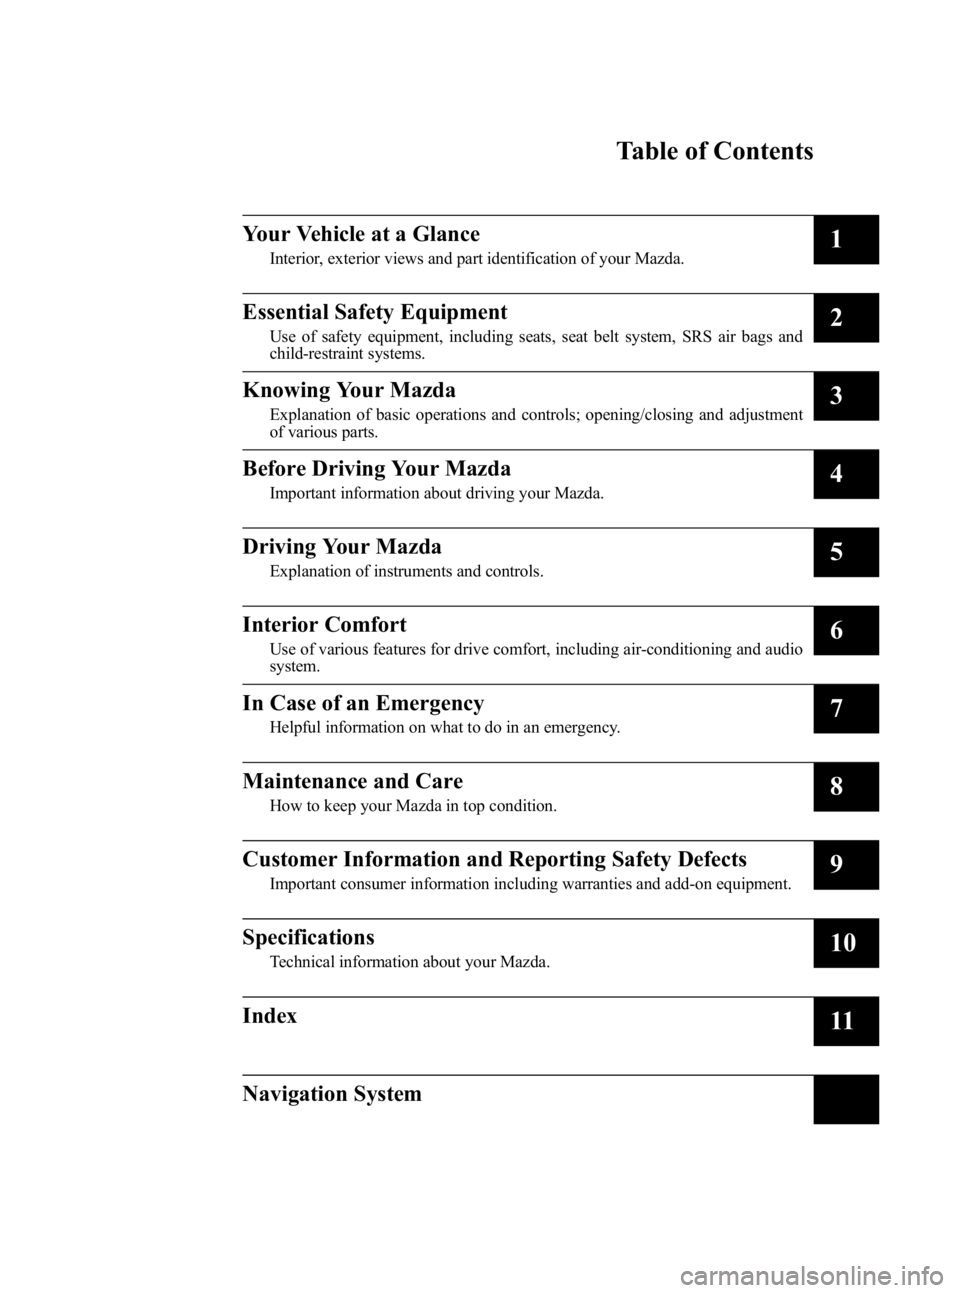 MAZDA MODEL 3 4-DOOR 2005  Owners Manual Black plate (5,1)
Mazda3_8T96-EA-04J_Edition3 Page5
Wednesday, May 11 2005 3:36 PM
Form No.8T96-EA-04J
Table of Contents
Your Vehicle at a Glance
Interior, exterior views and part identification of yo